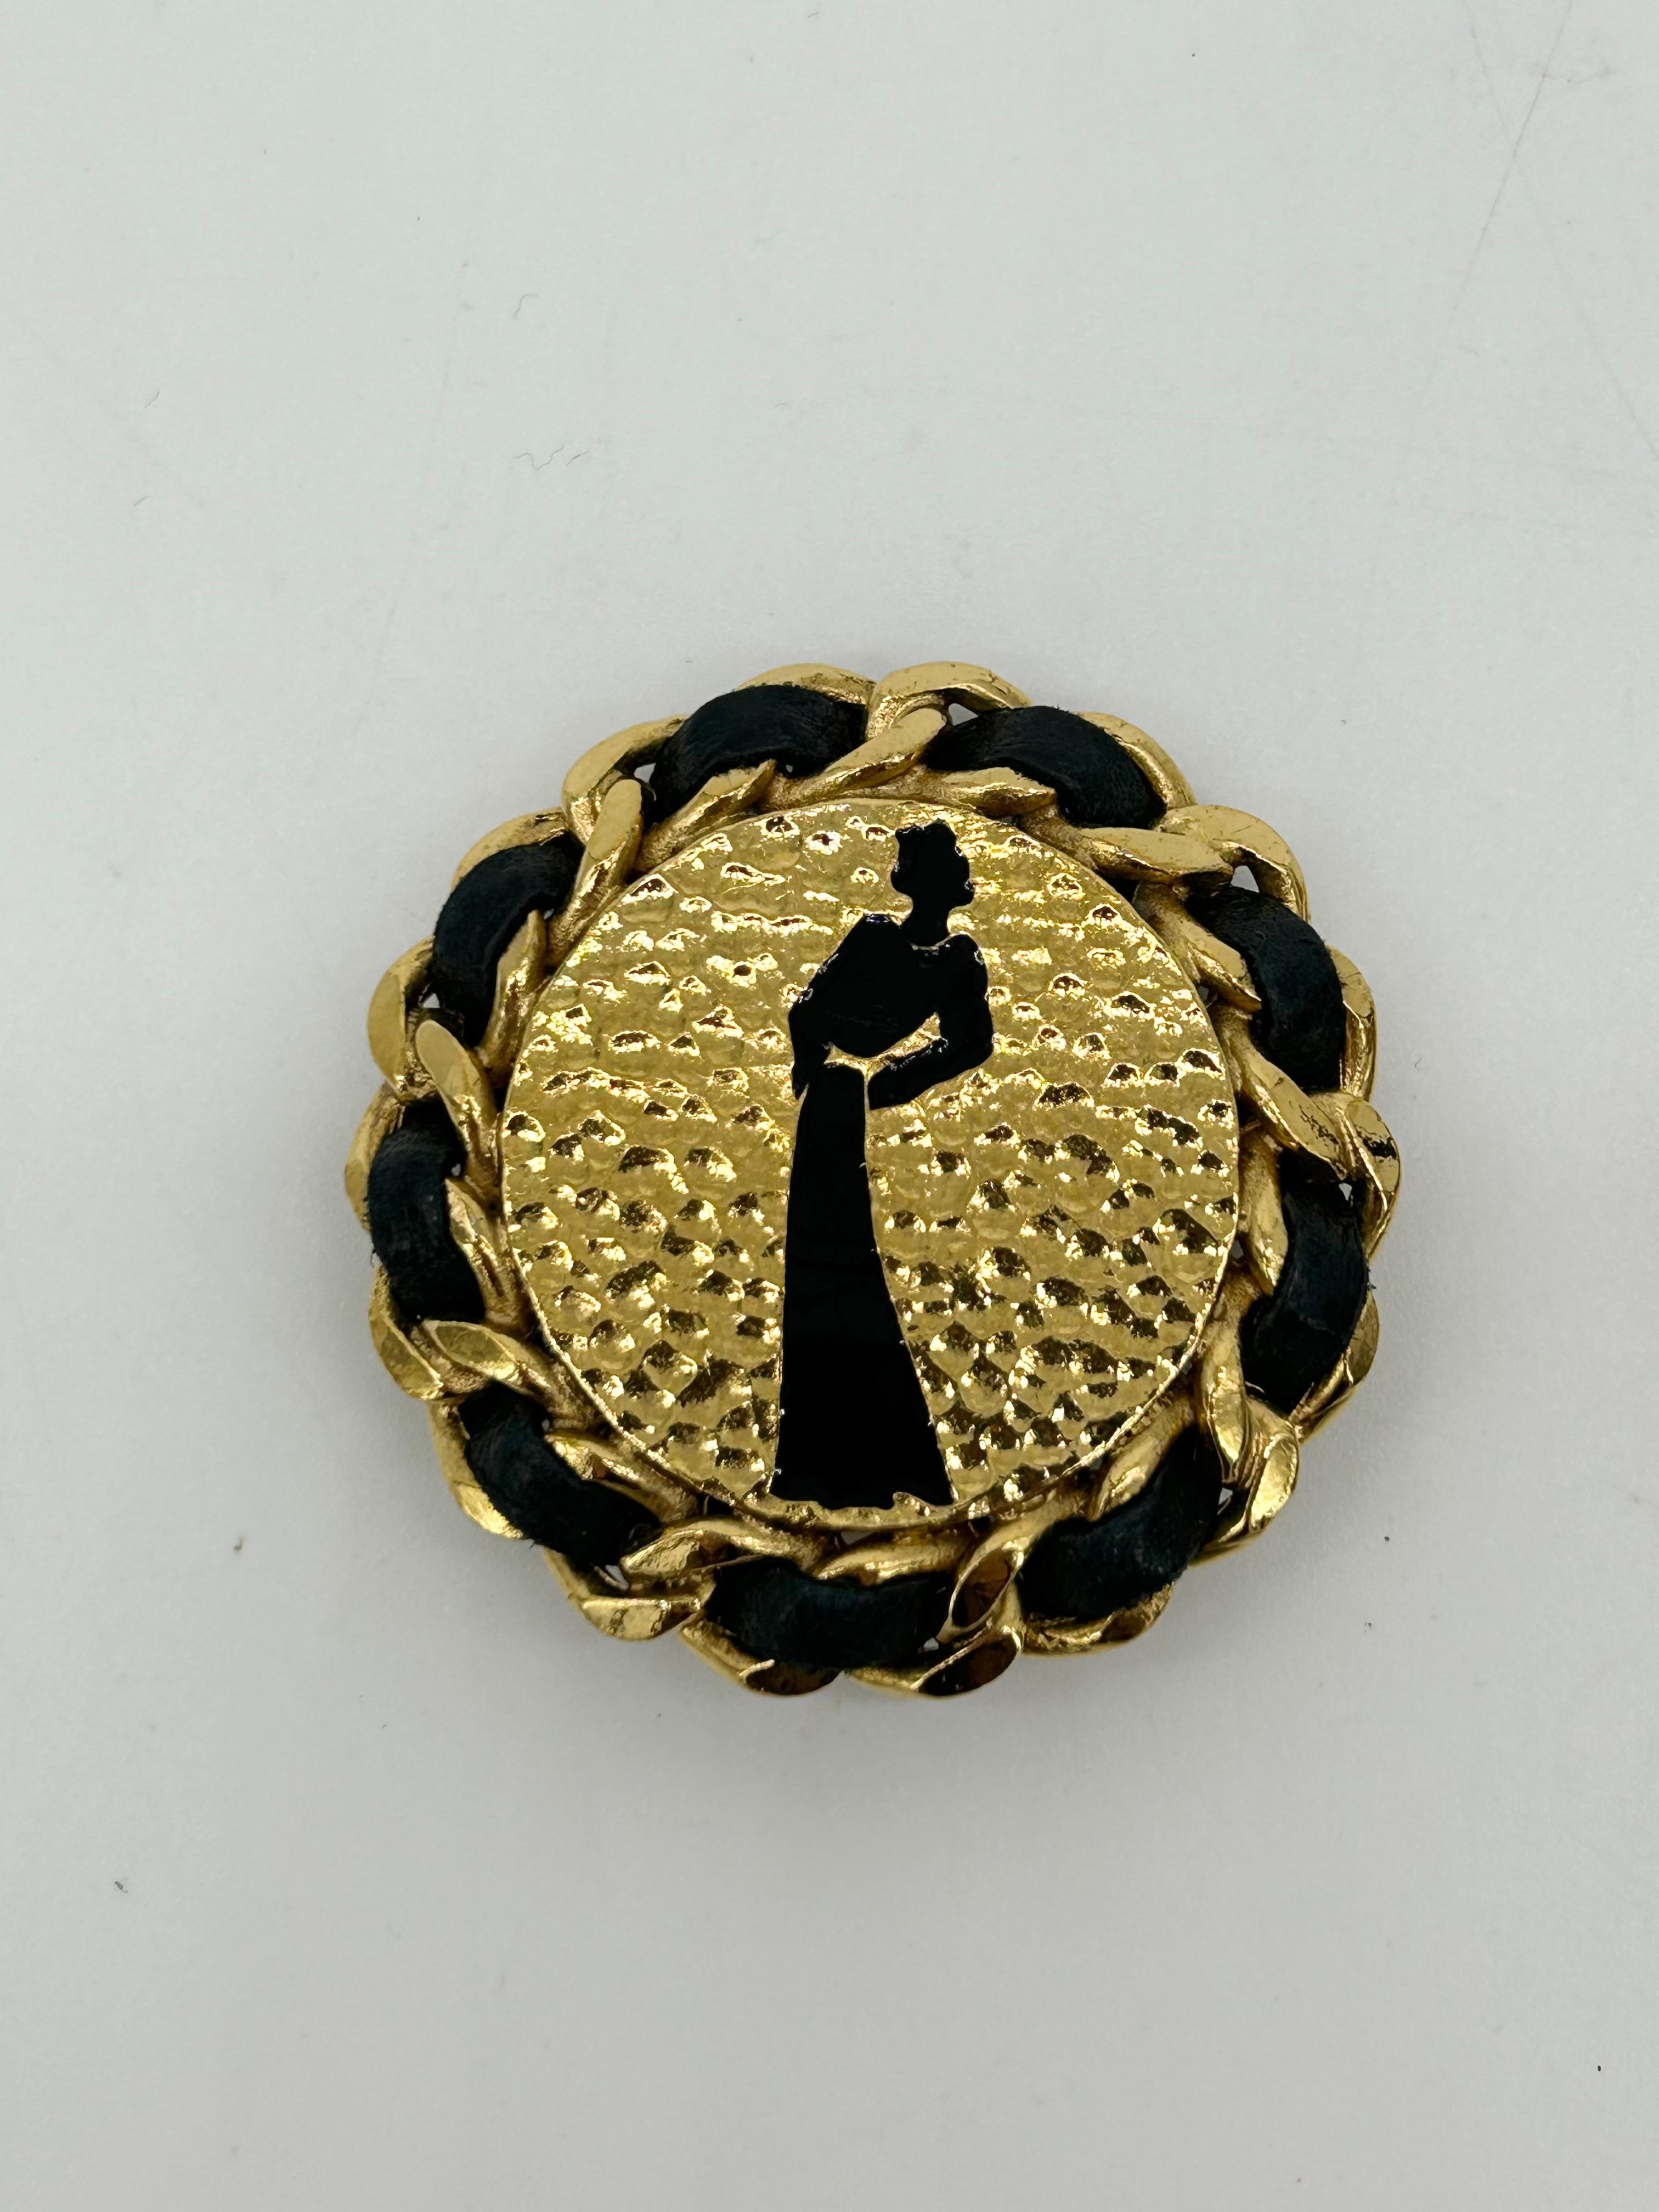 Chanel Vintage Gold Leather Chain Round Earrings In Excellent Condition For Sale In Philadelphia, PA